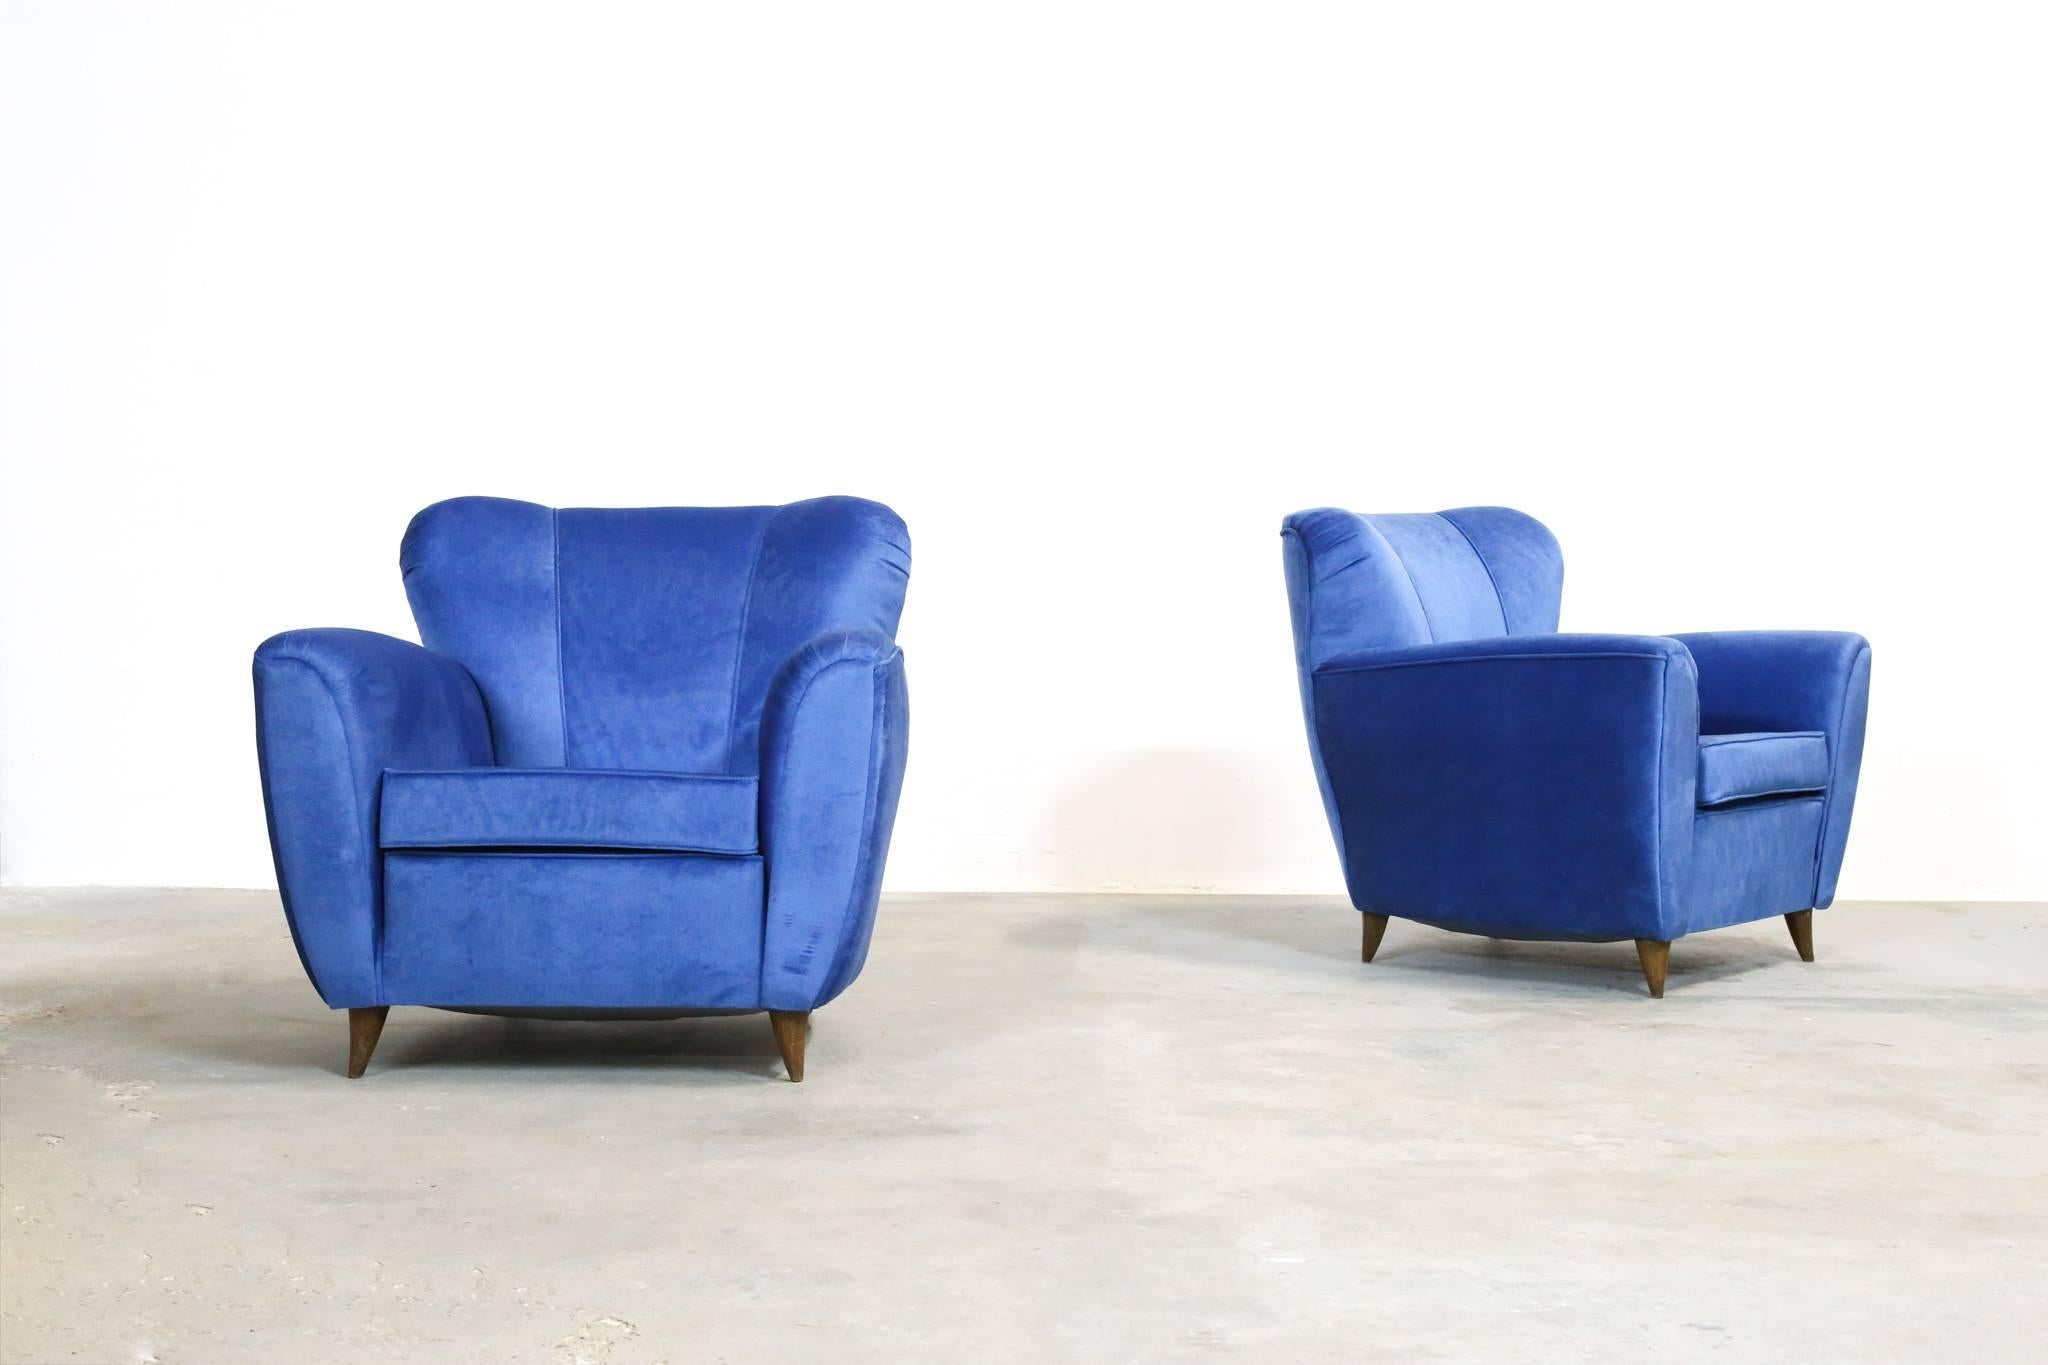 Pair of armchairs in the style of Gio Ponti.
Freshly upholstery.